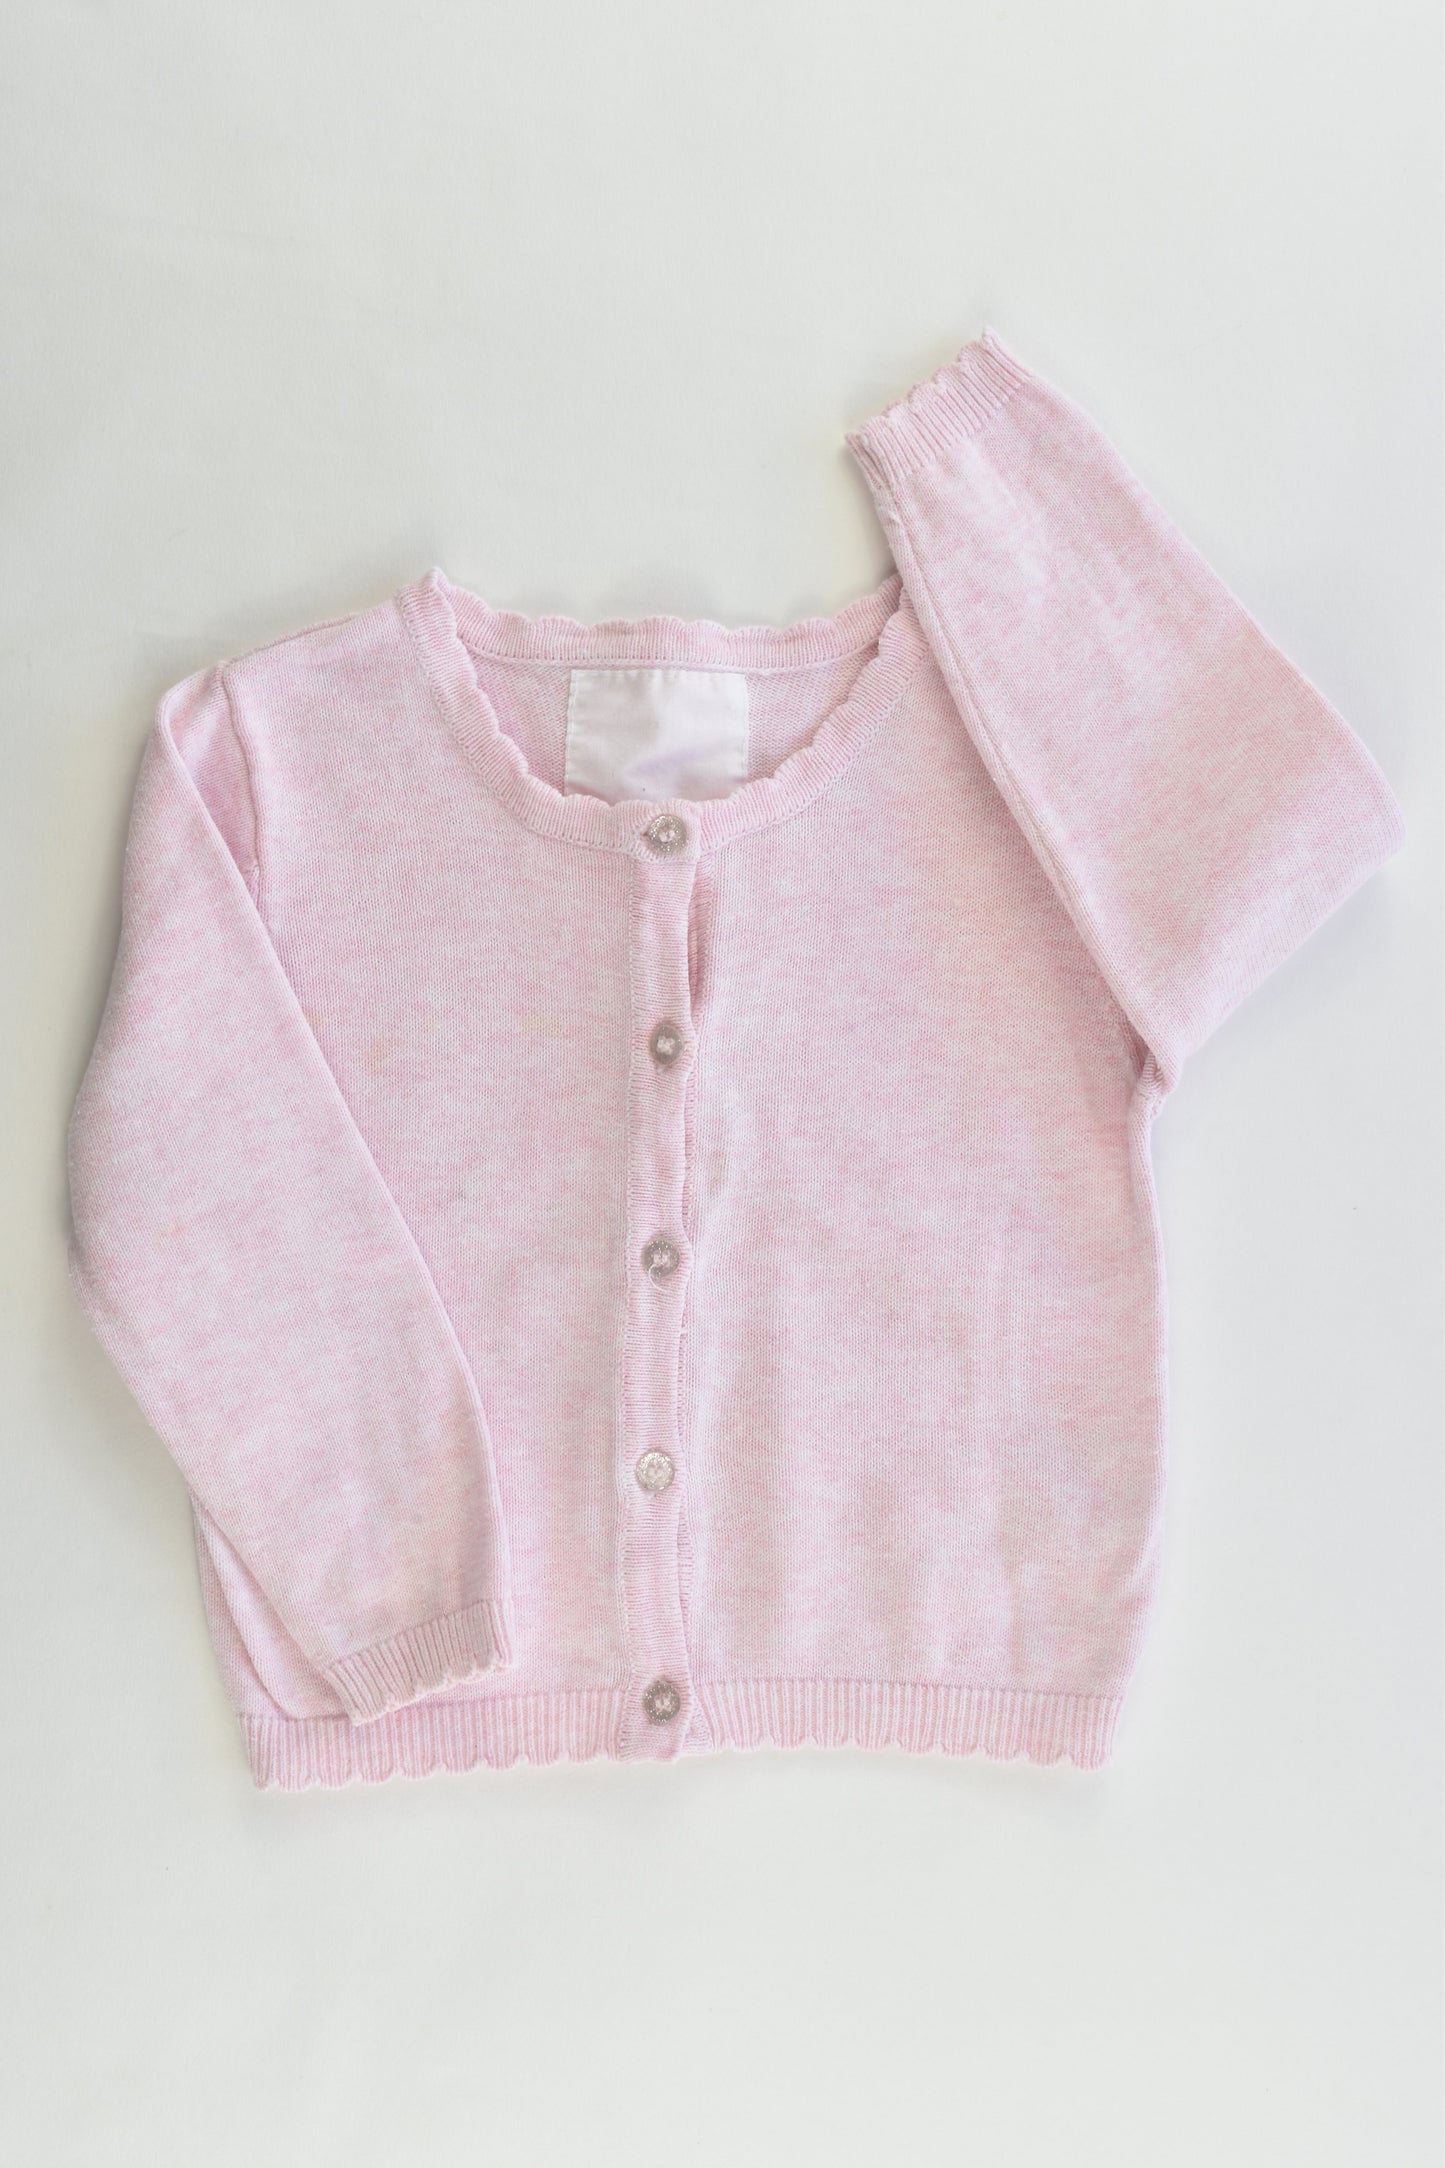 Primark Size 9/12 months (0-1) Knitted Cardigan